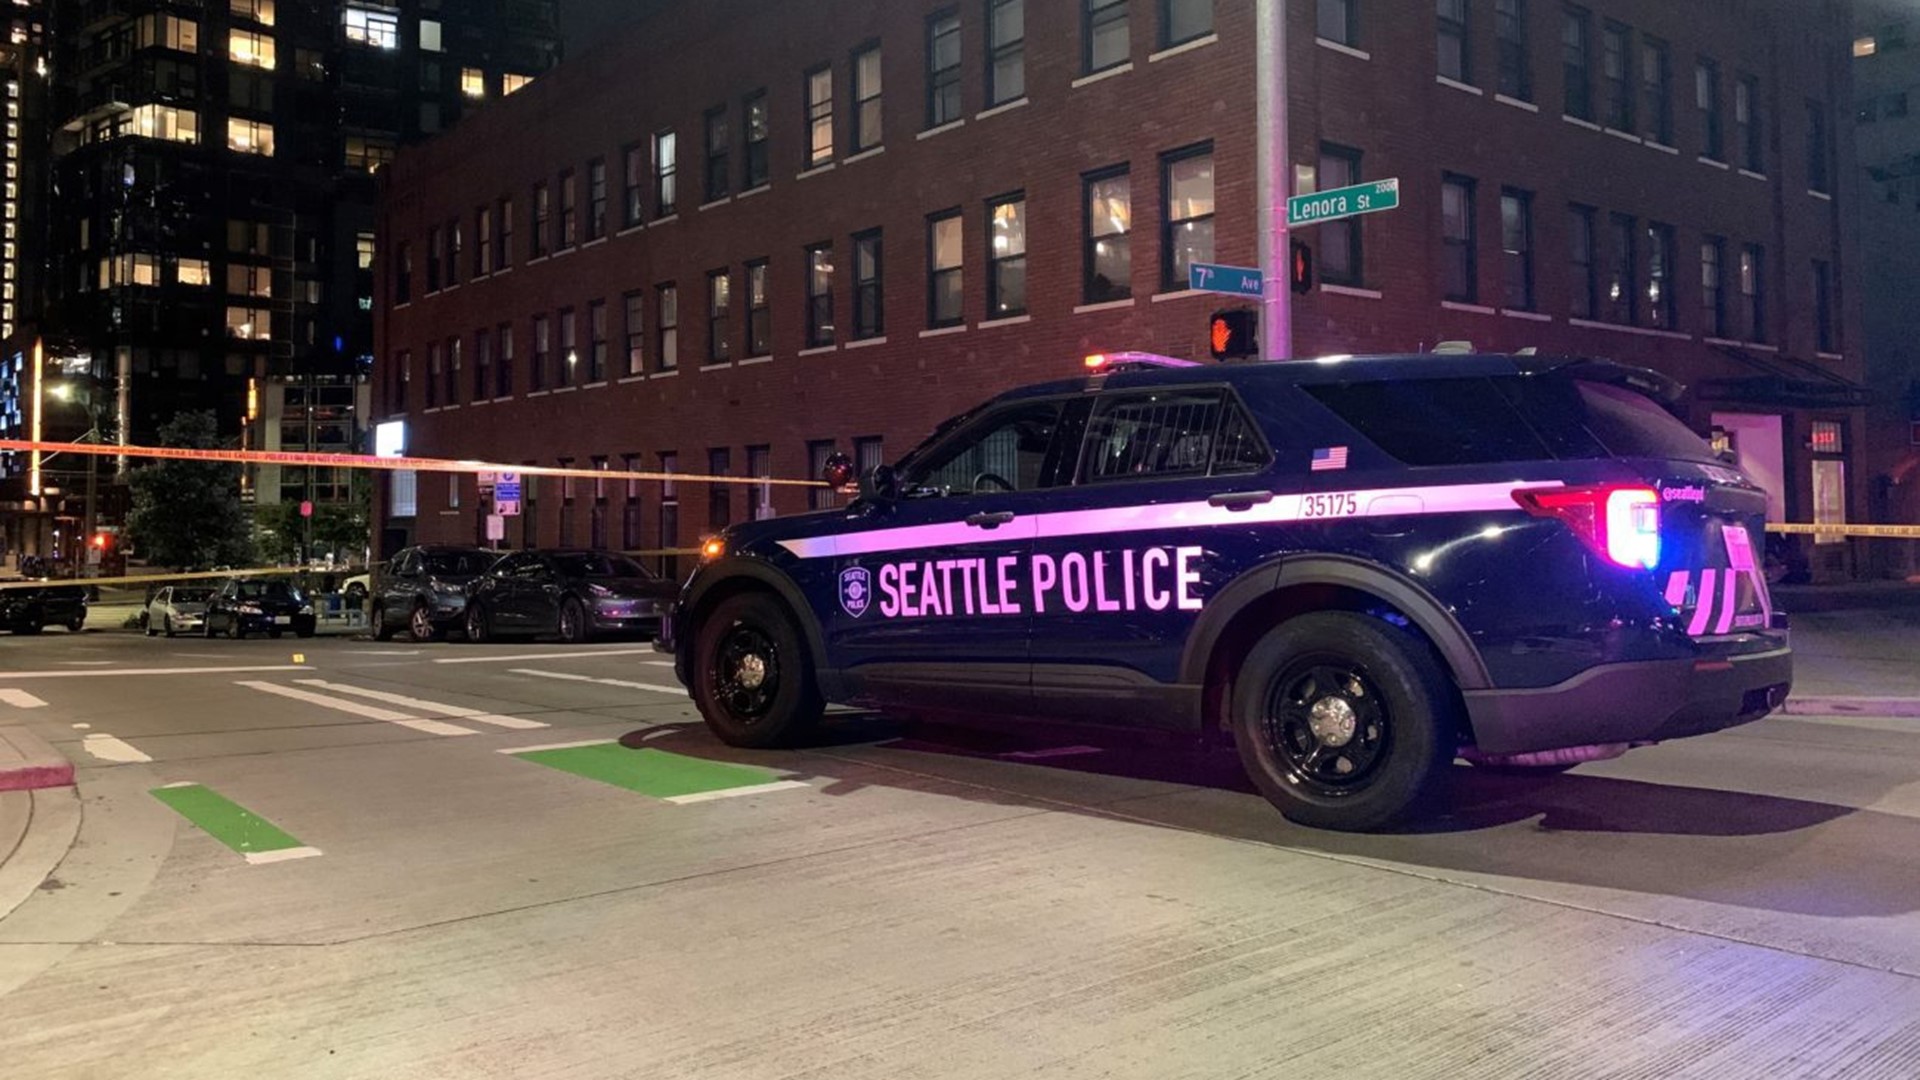 The City of Seattle and the Department of Justice have entered into a new agreement regarding the consent decree with the Seattle Police Department.